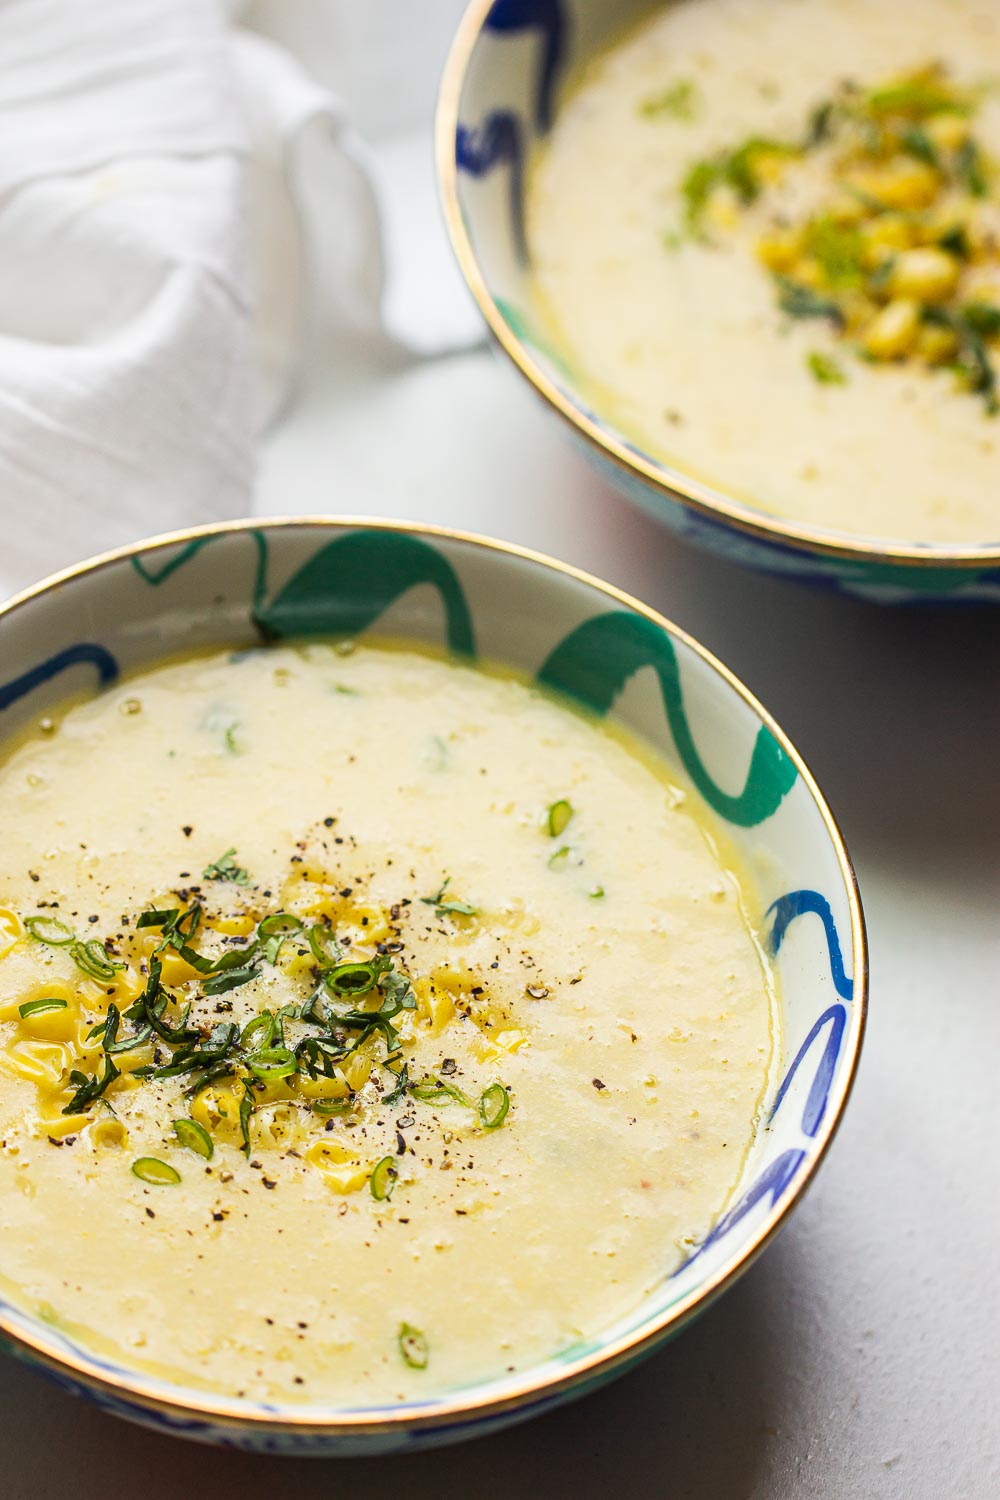 This thick, potato-studded corn chowder is perfect on a cold winter night or to satisfy your summer soup cravings. It is a simple recipe, rich, creamy and velvety smooth. It has been a family favorite for years!